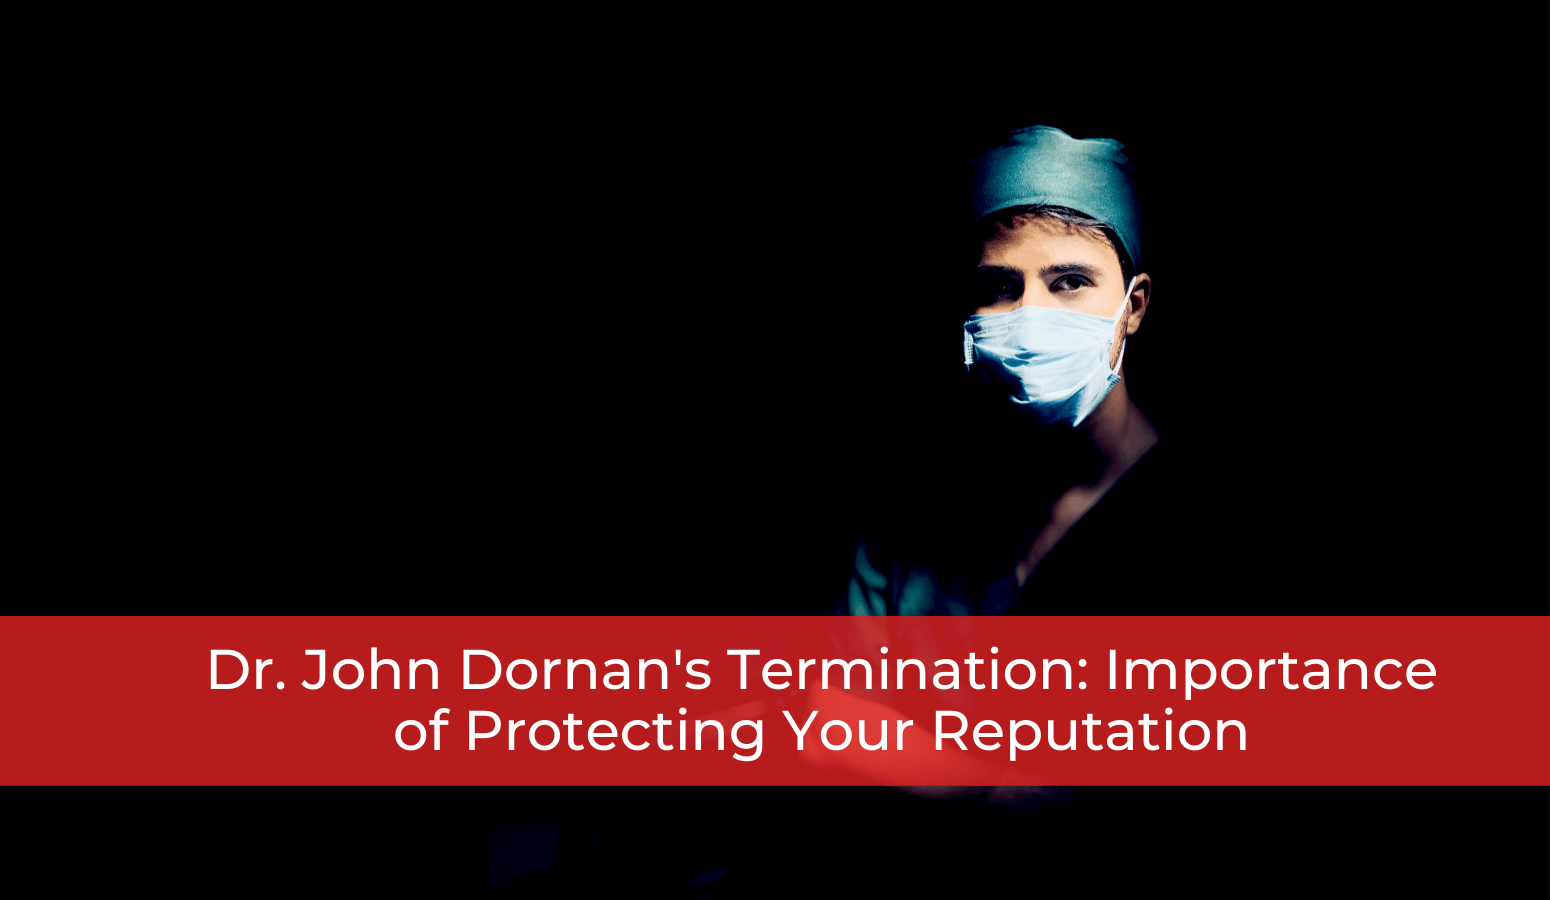 Featured image for “Dr. John Dornan’s Termination: Importance of Protecting Your Reputation”